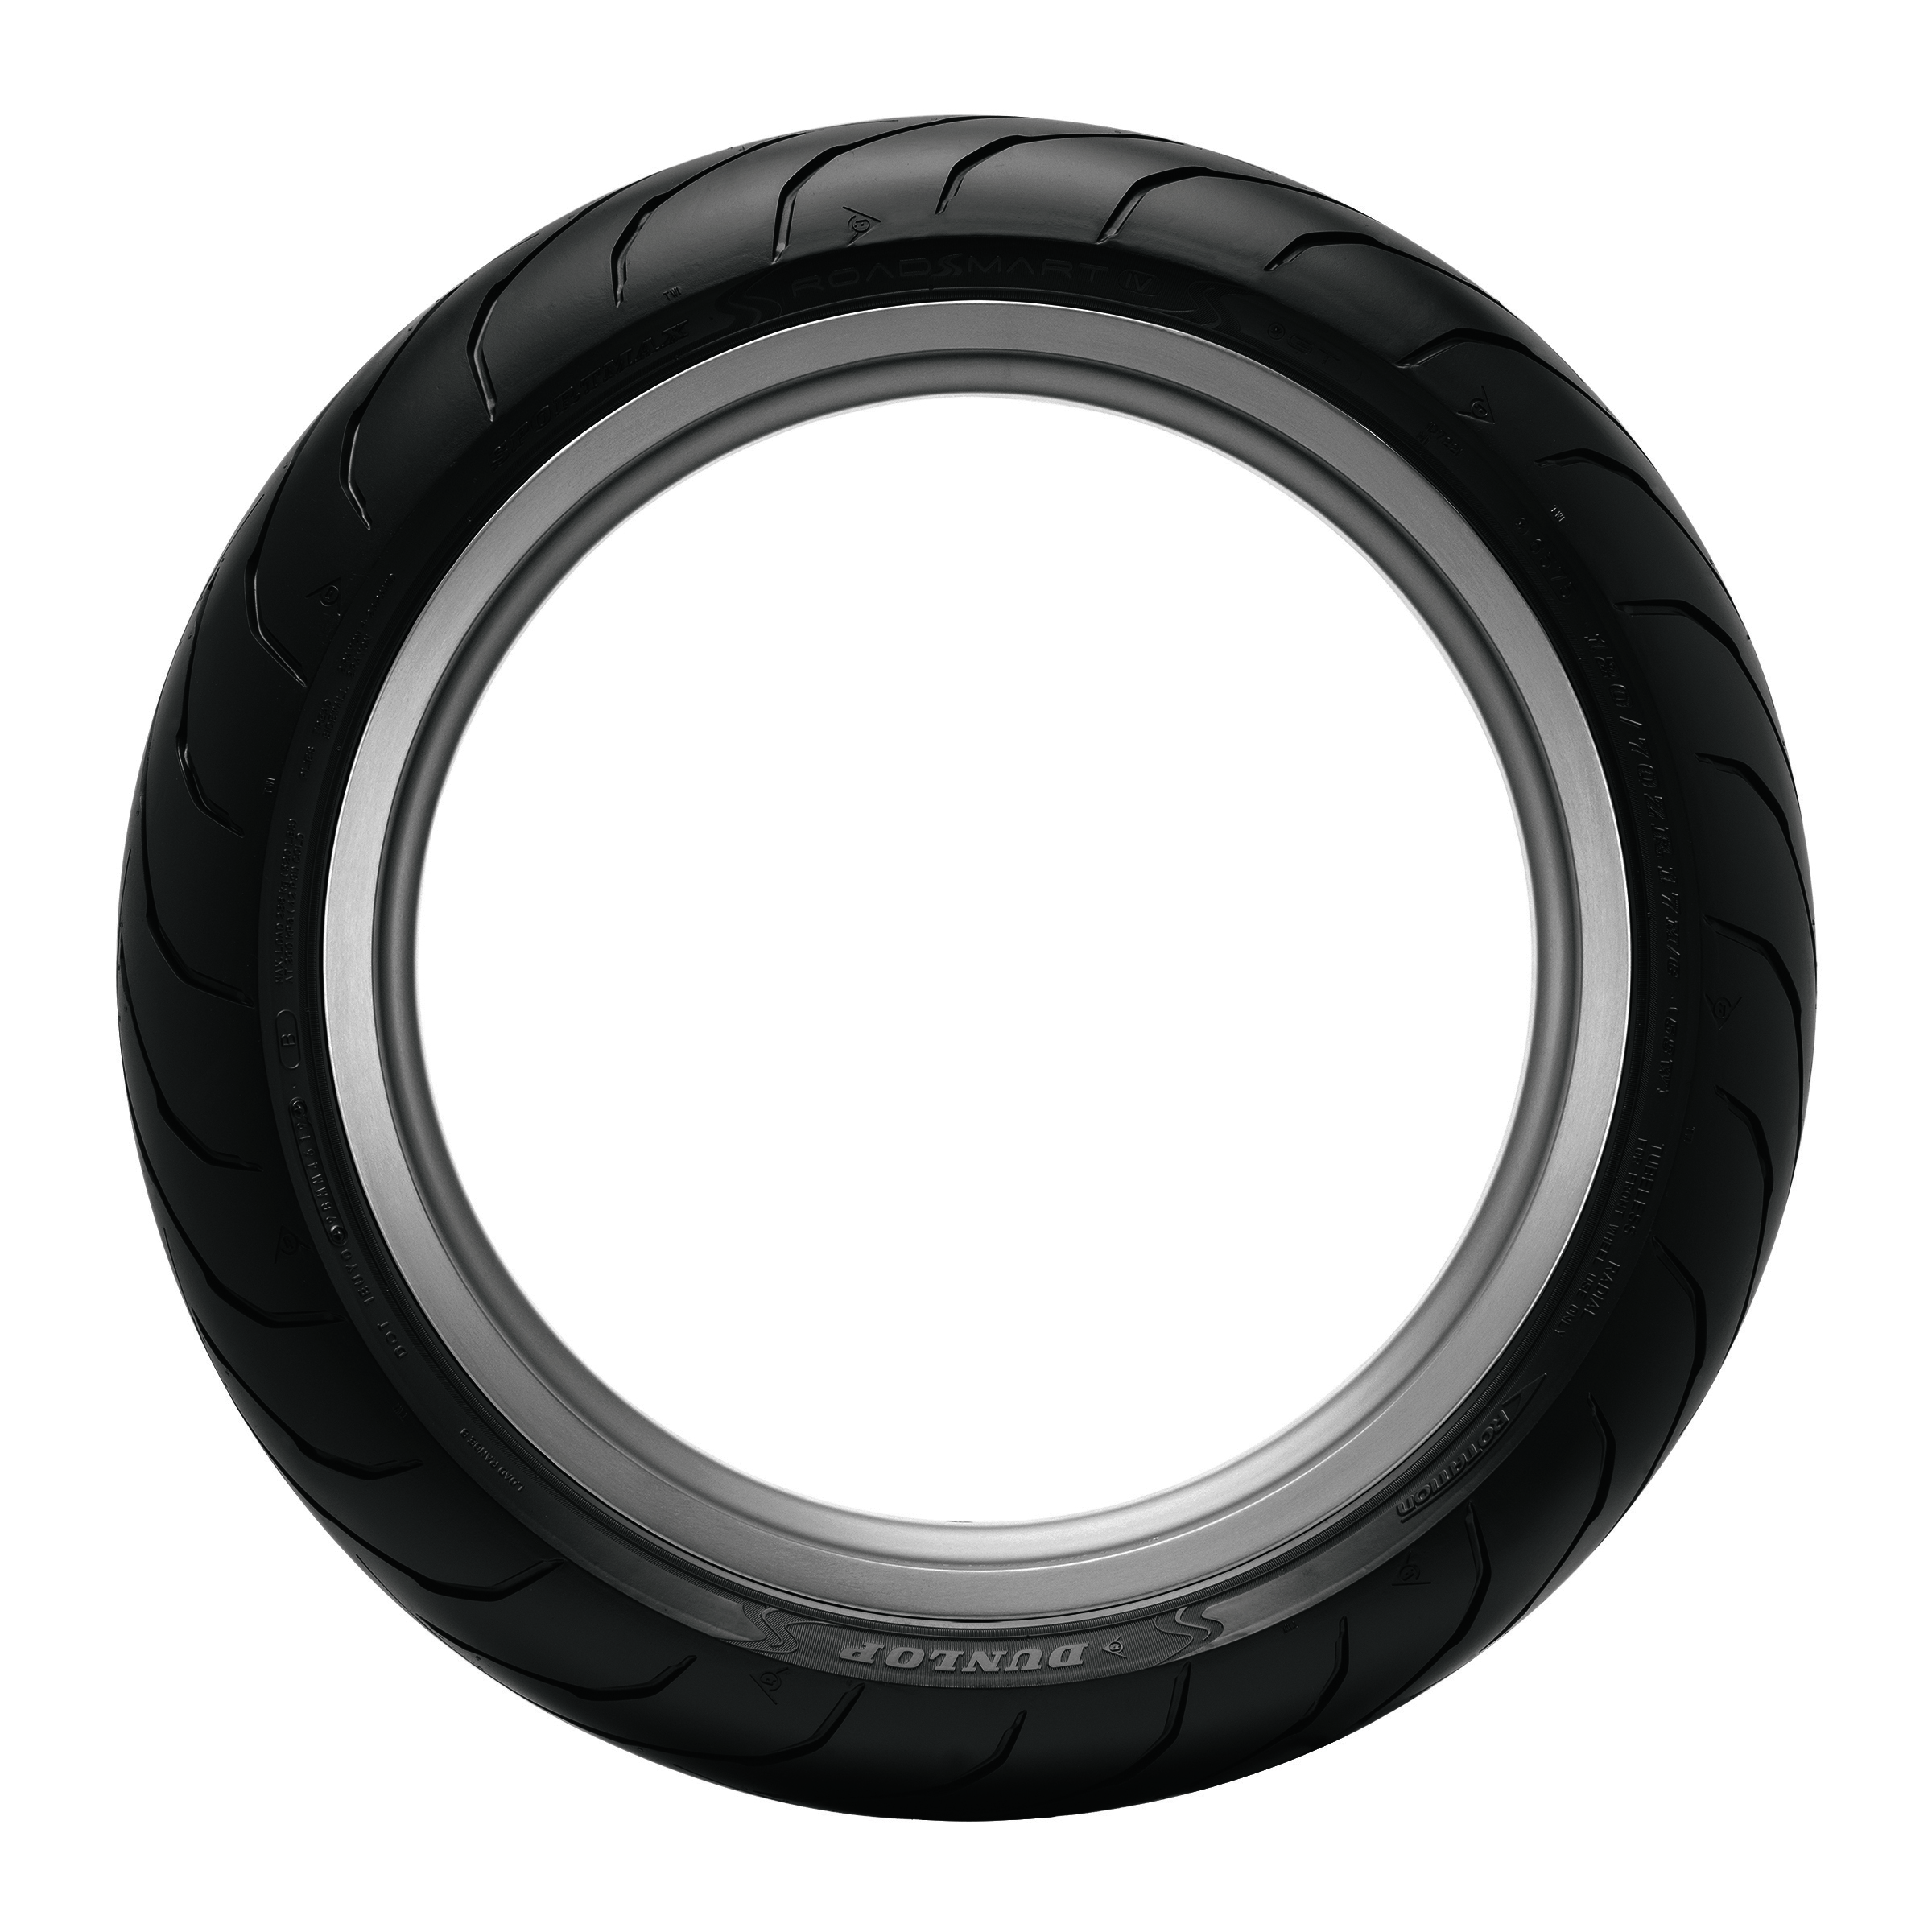 120/70ZR17 Front Roadsmart IV Sport Touring Tire - Click Image to Close